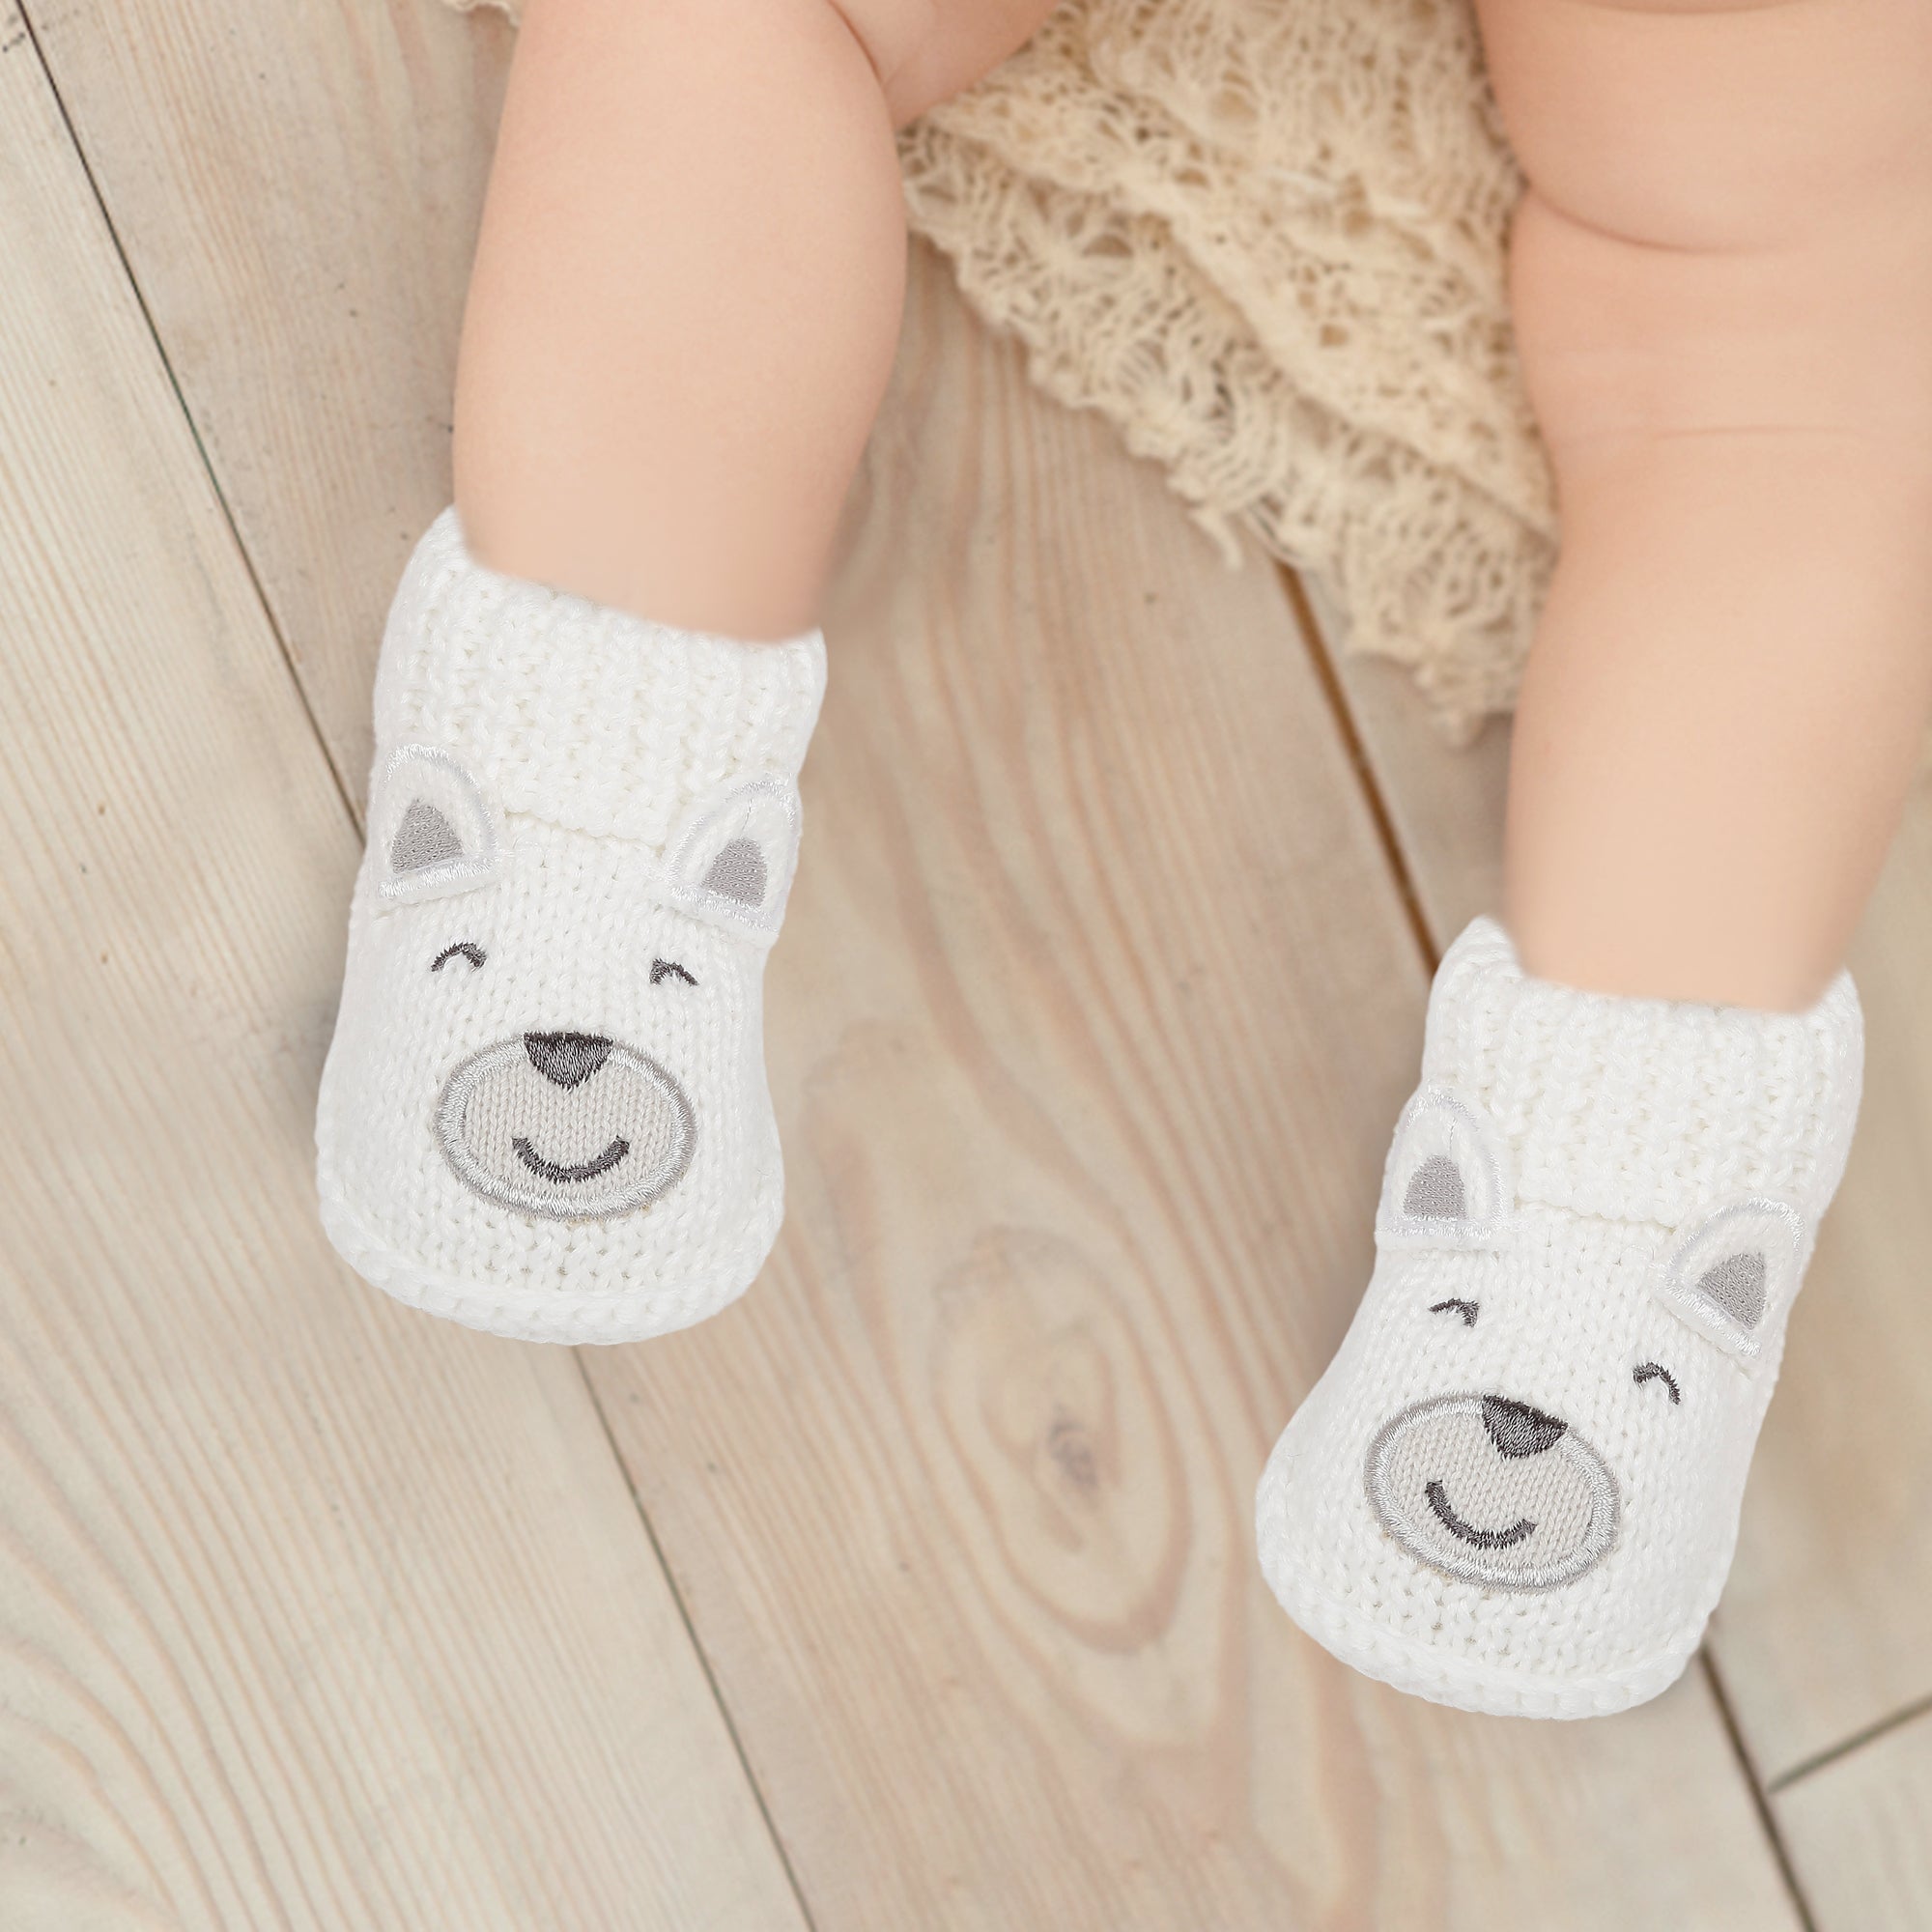 Get Infant Lace & Cotton Socks Set for New Born Baby Online!